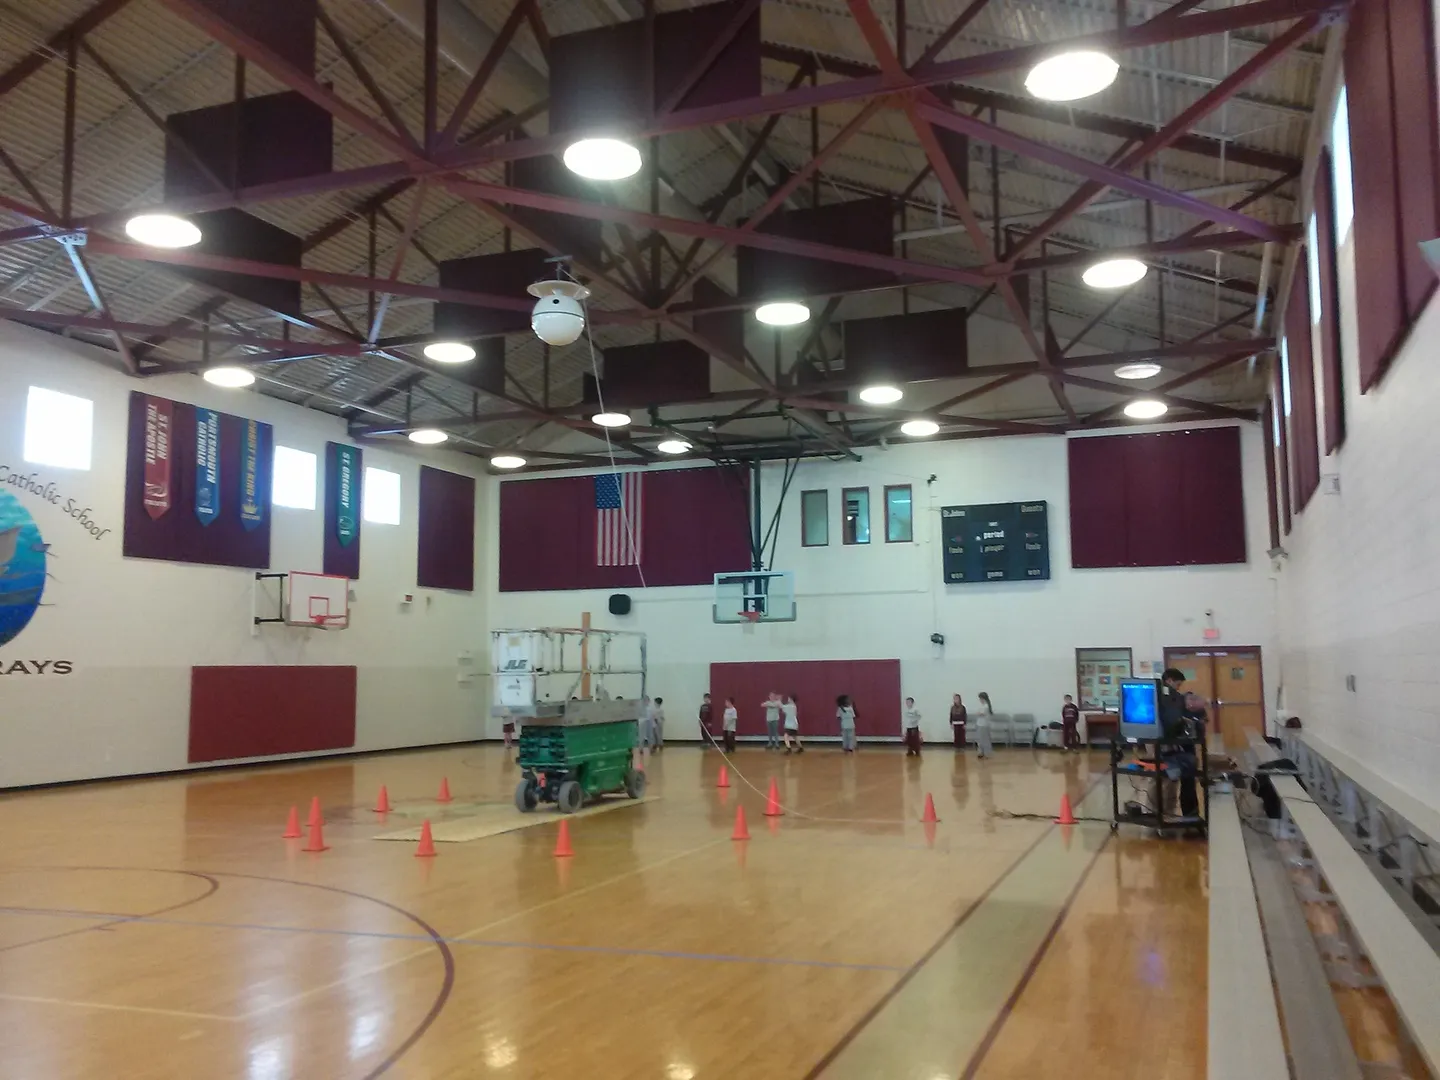 A gym with many cones on the floor